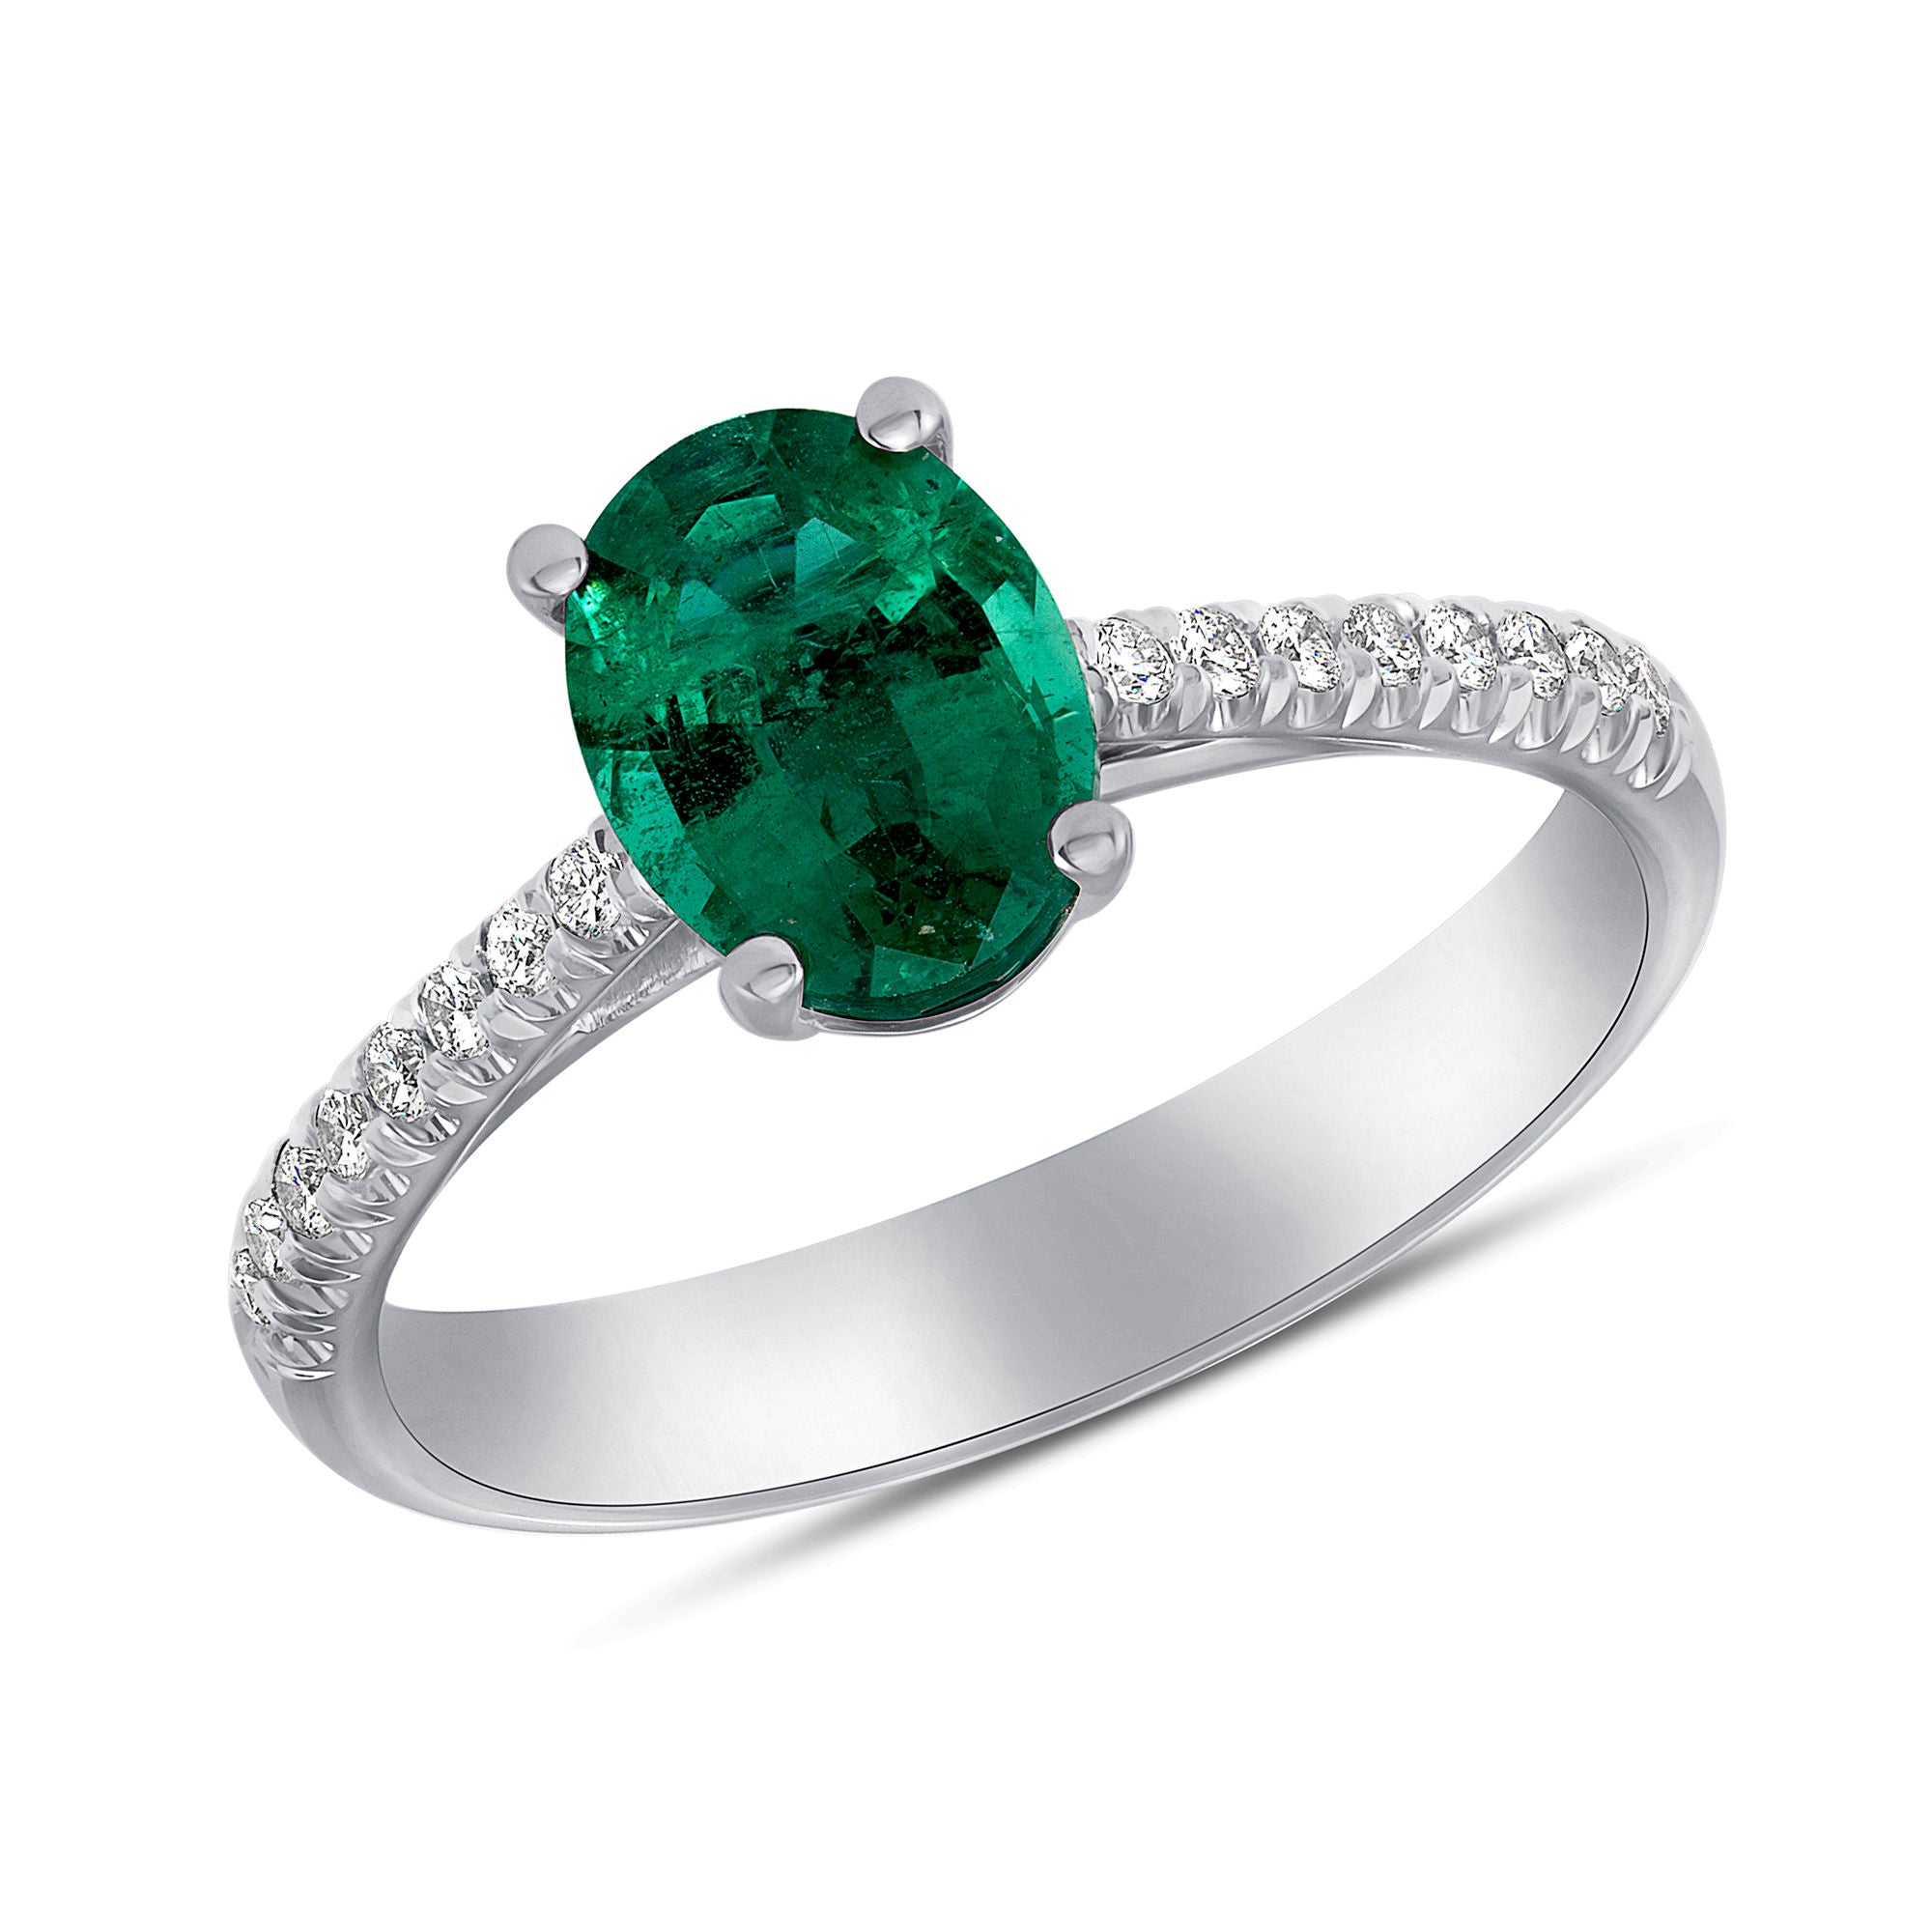 Solitaire Oval Emerald Ring - 1.43ct TW